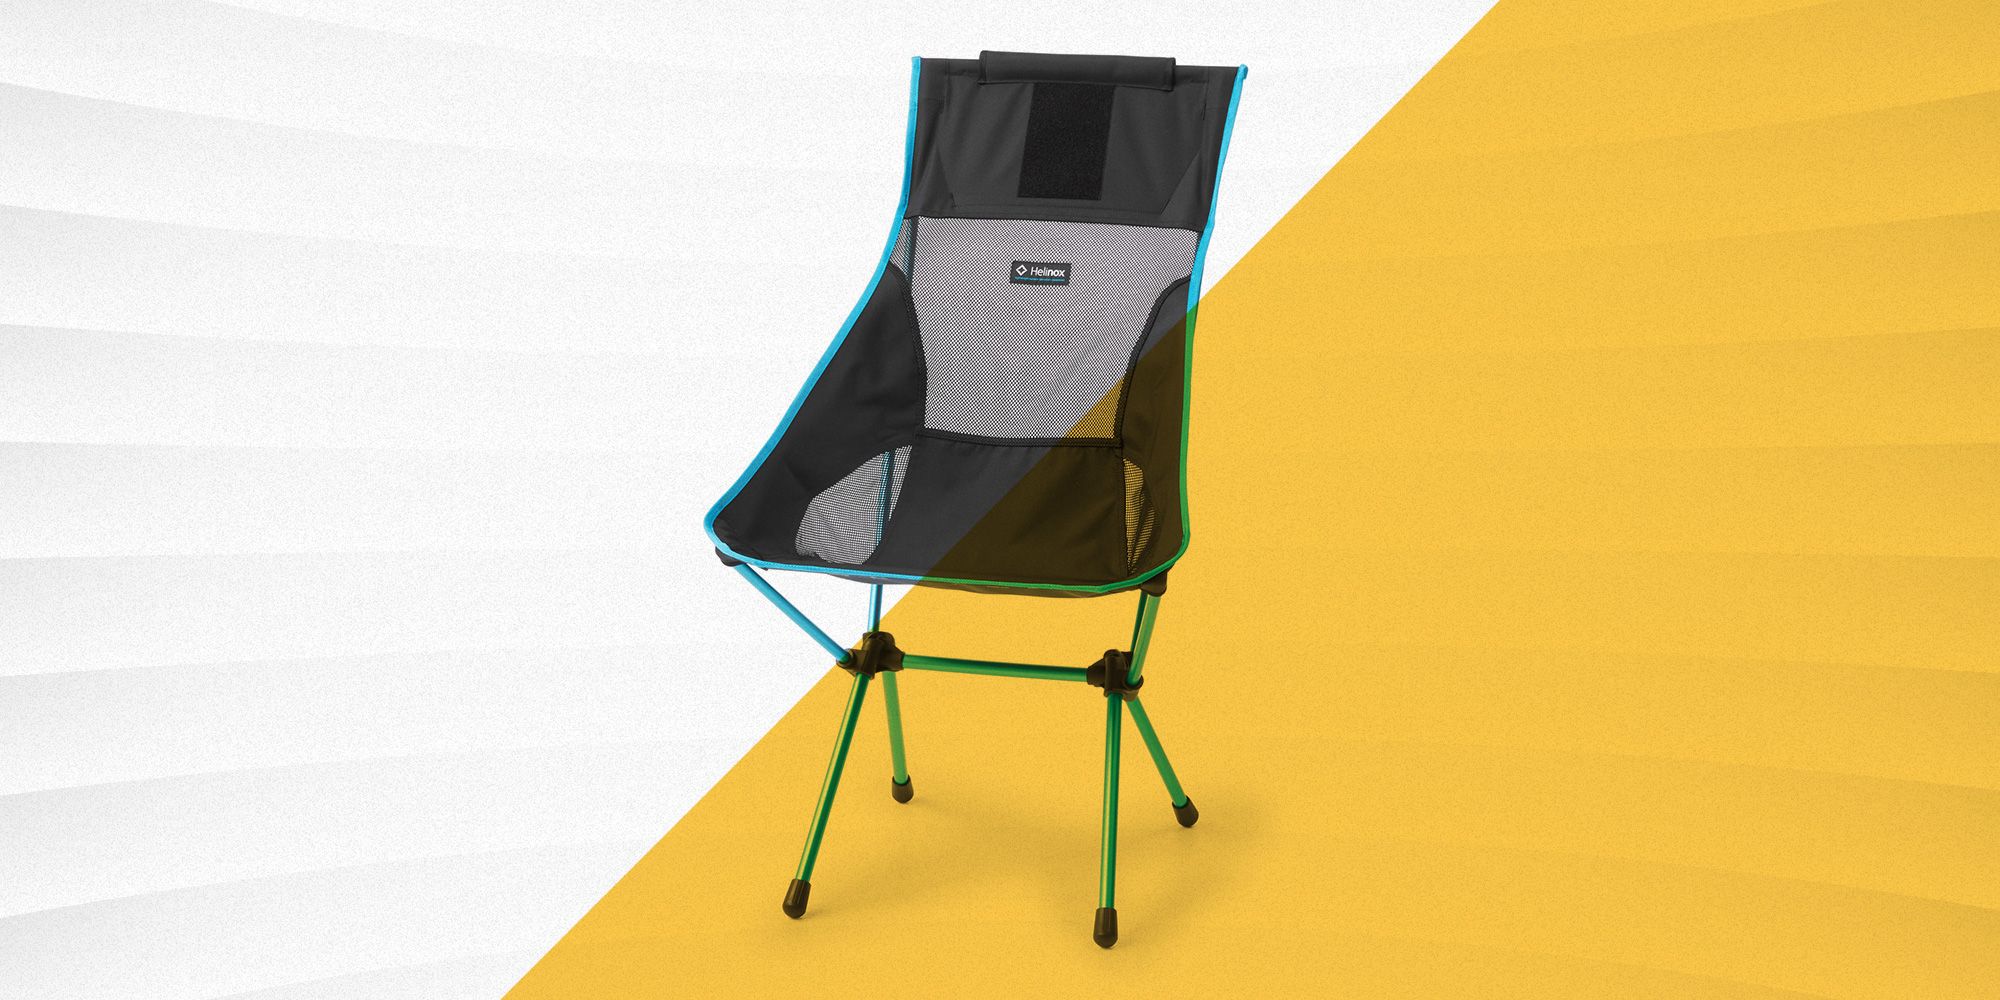 Sfee Ultralight Folding Camping Chairs Heavy Duty Portable Compact Breathable Mesh Kids Camp Chair Comfortable Perfect for Backpacking Hiking Picnic Outdoors BBQ Travel Finishing with Carry Bag 